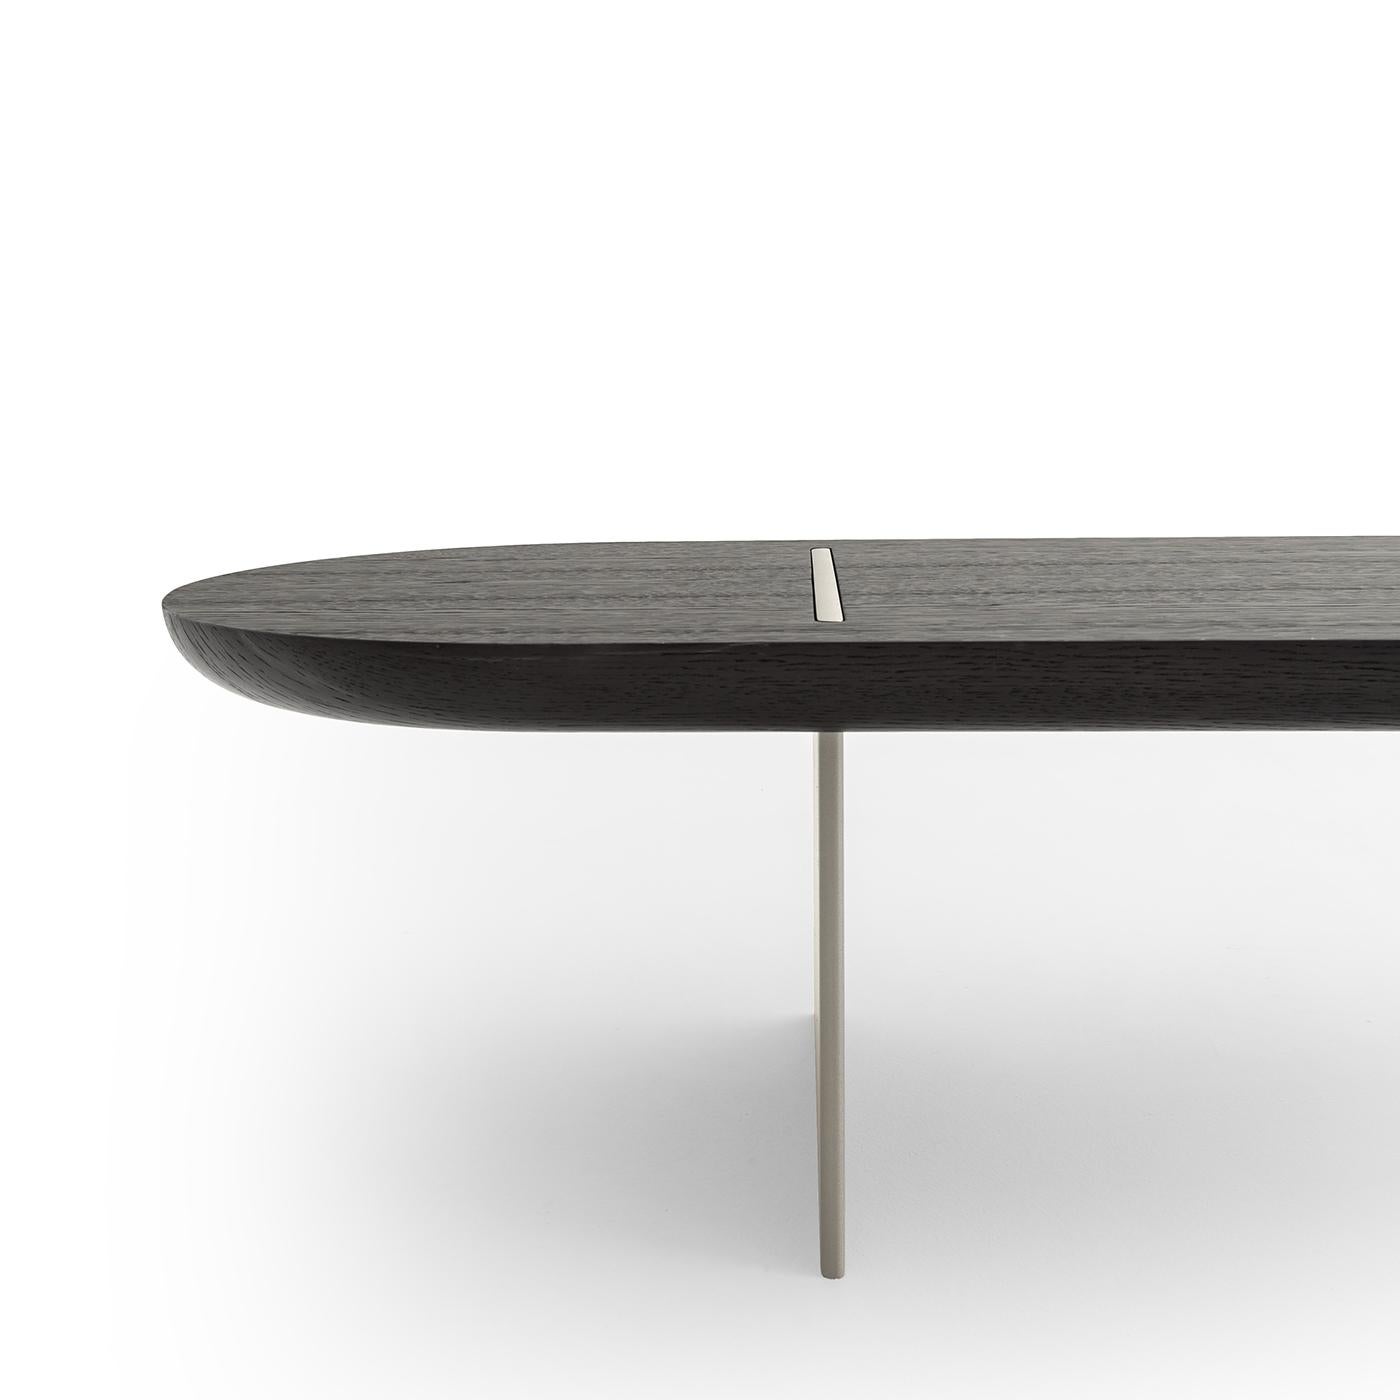 An elongated, rounded MDF top with blunted borders and veneered with Laguna oak reveals the French baguette inspiration behind this coffee table. Raised on orthogonal metal sheets - epoxy-powder-varnished in champagne - for a graceful sculptural